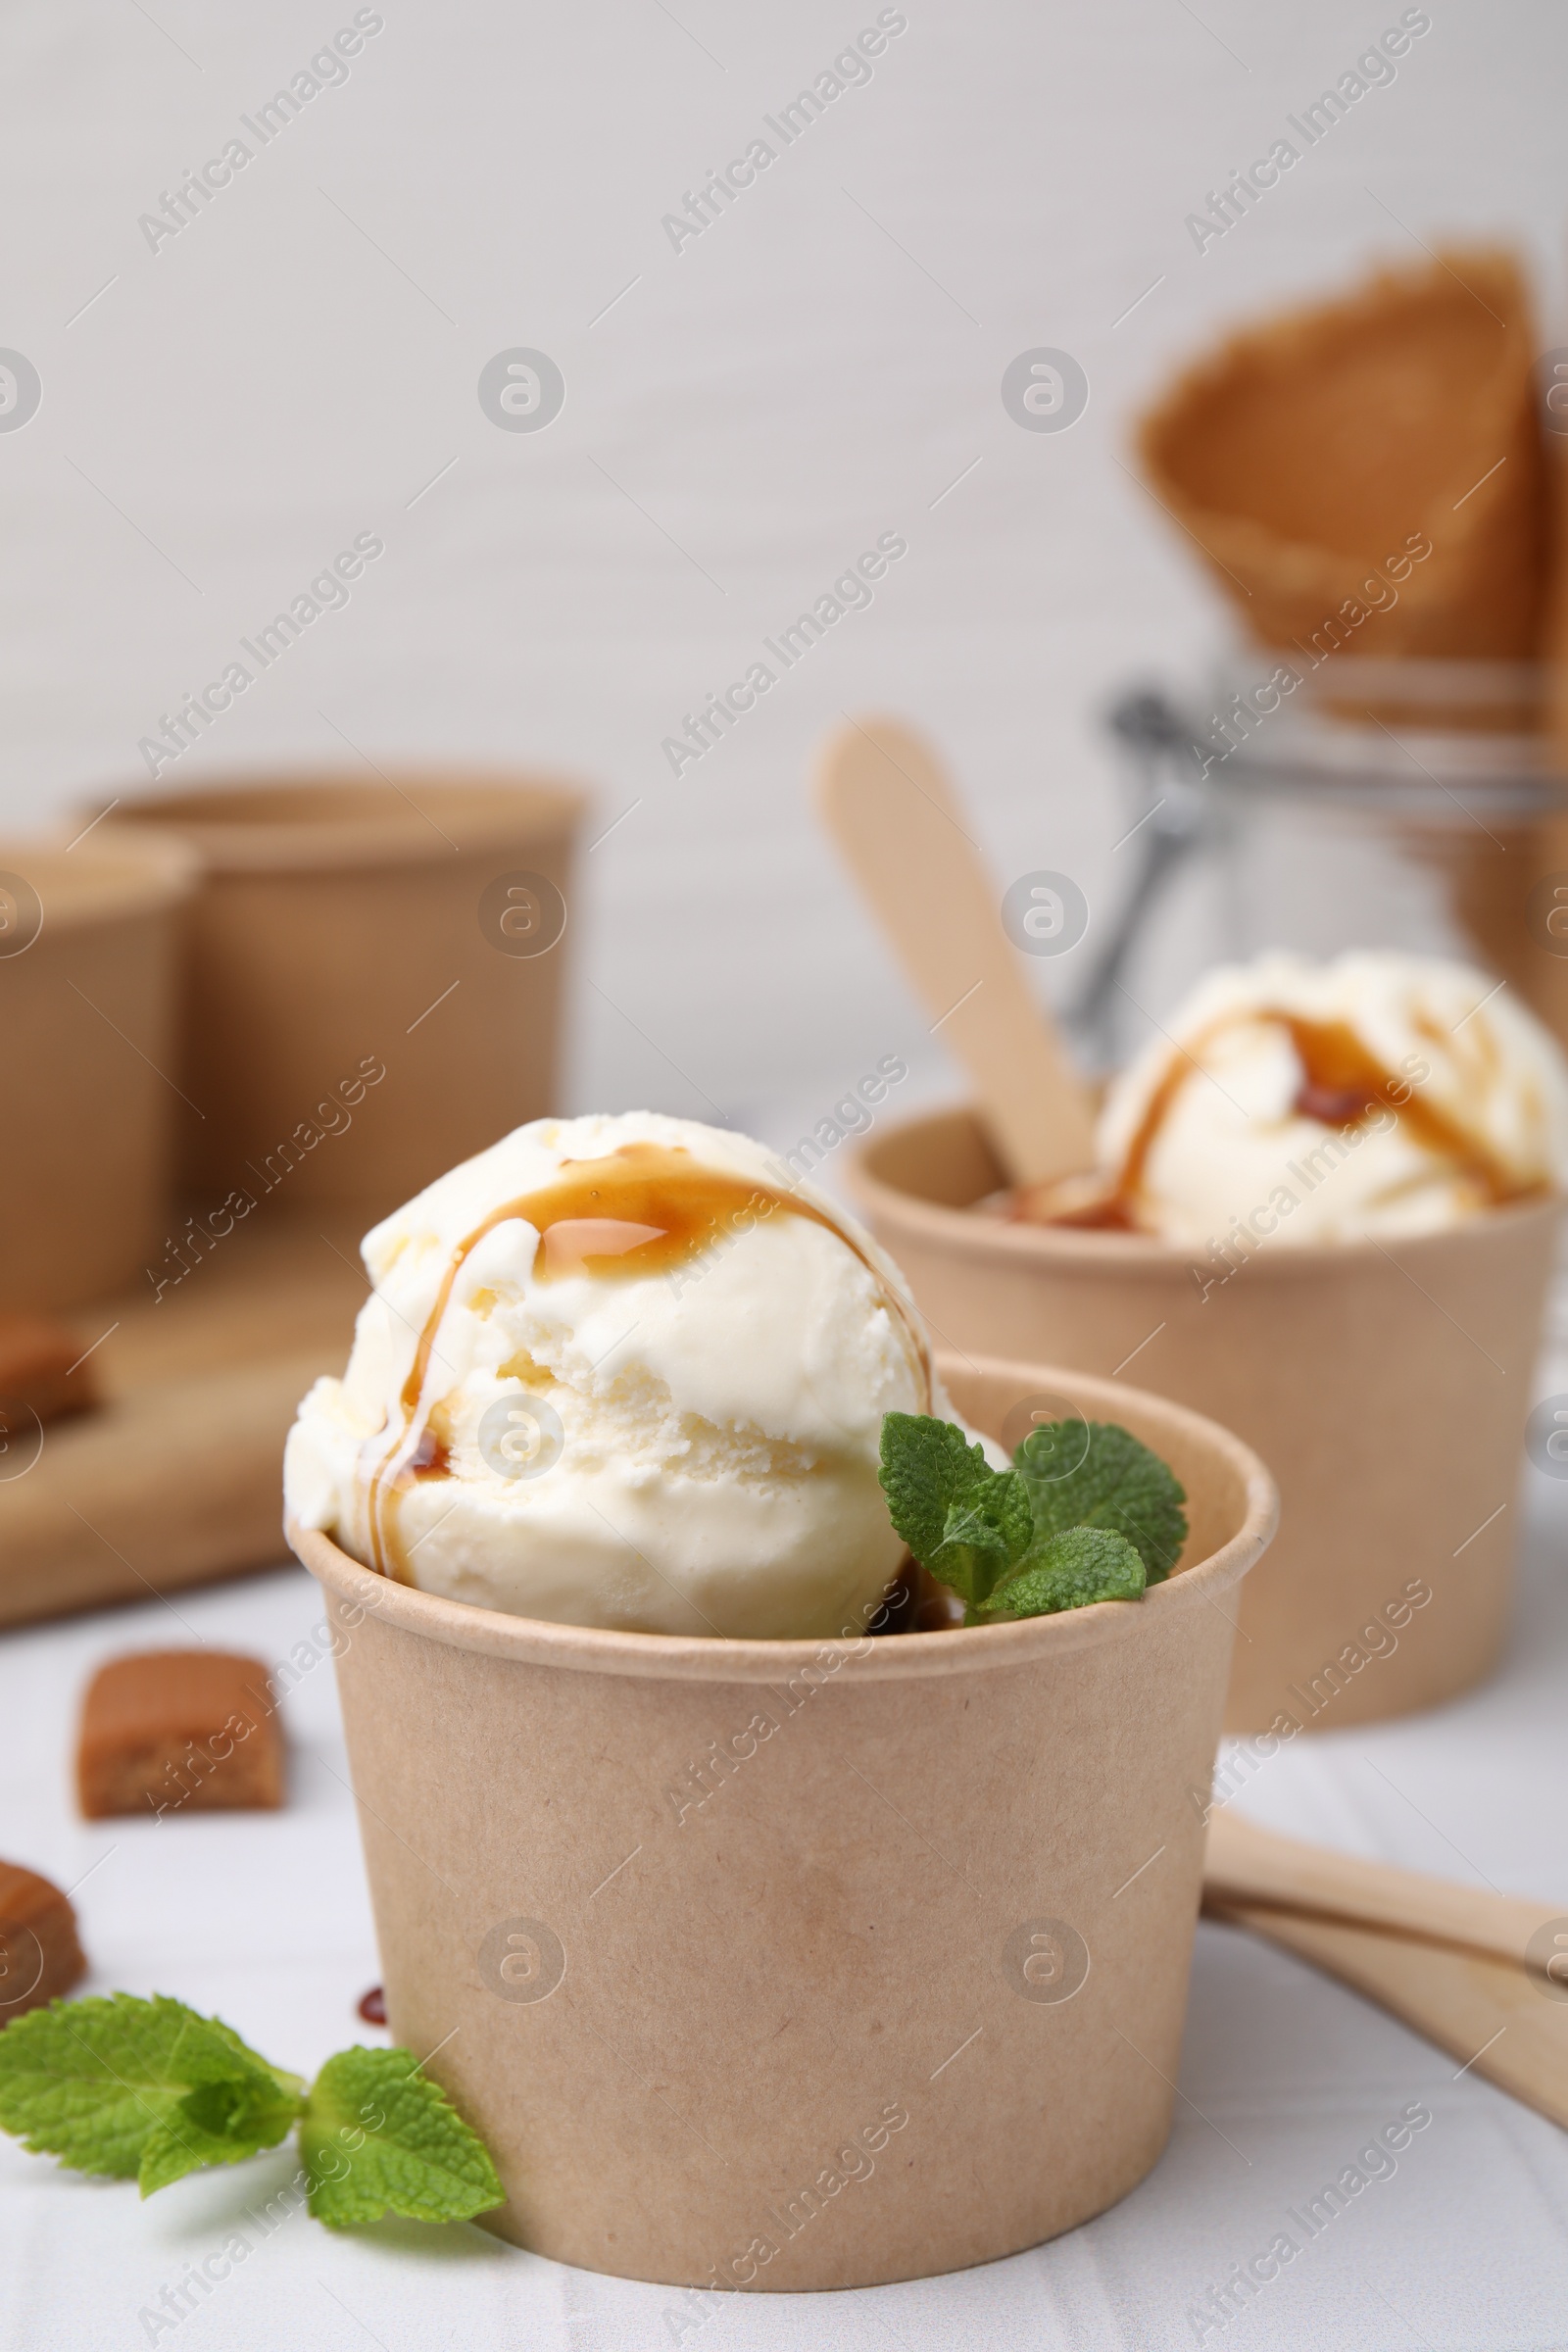 Photo of Scoops of ice cream with caramel sauce, mint leaves and candies on white tiled table, closeup